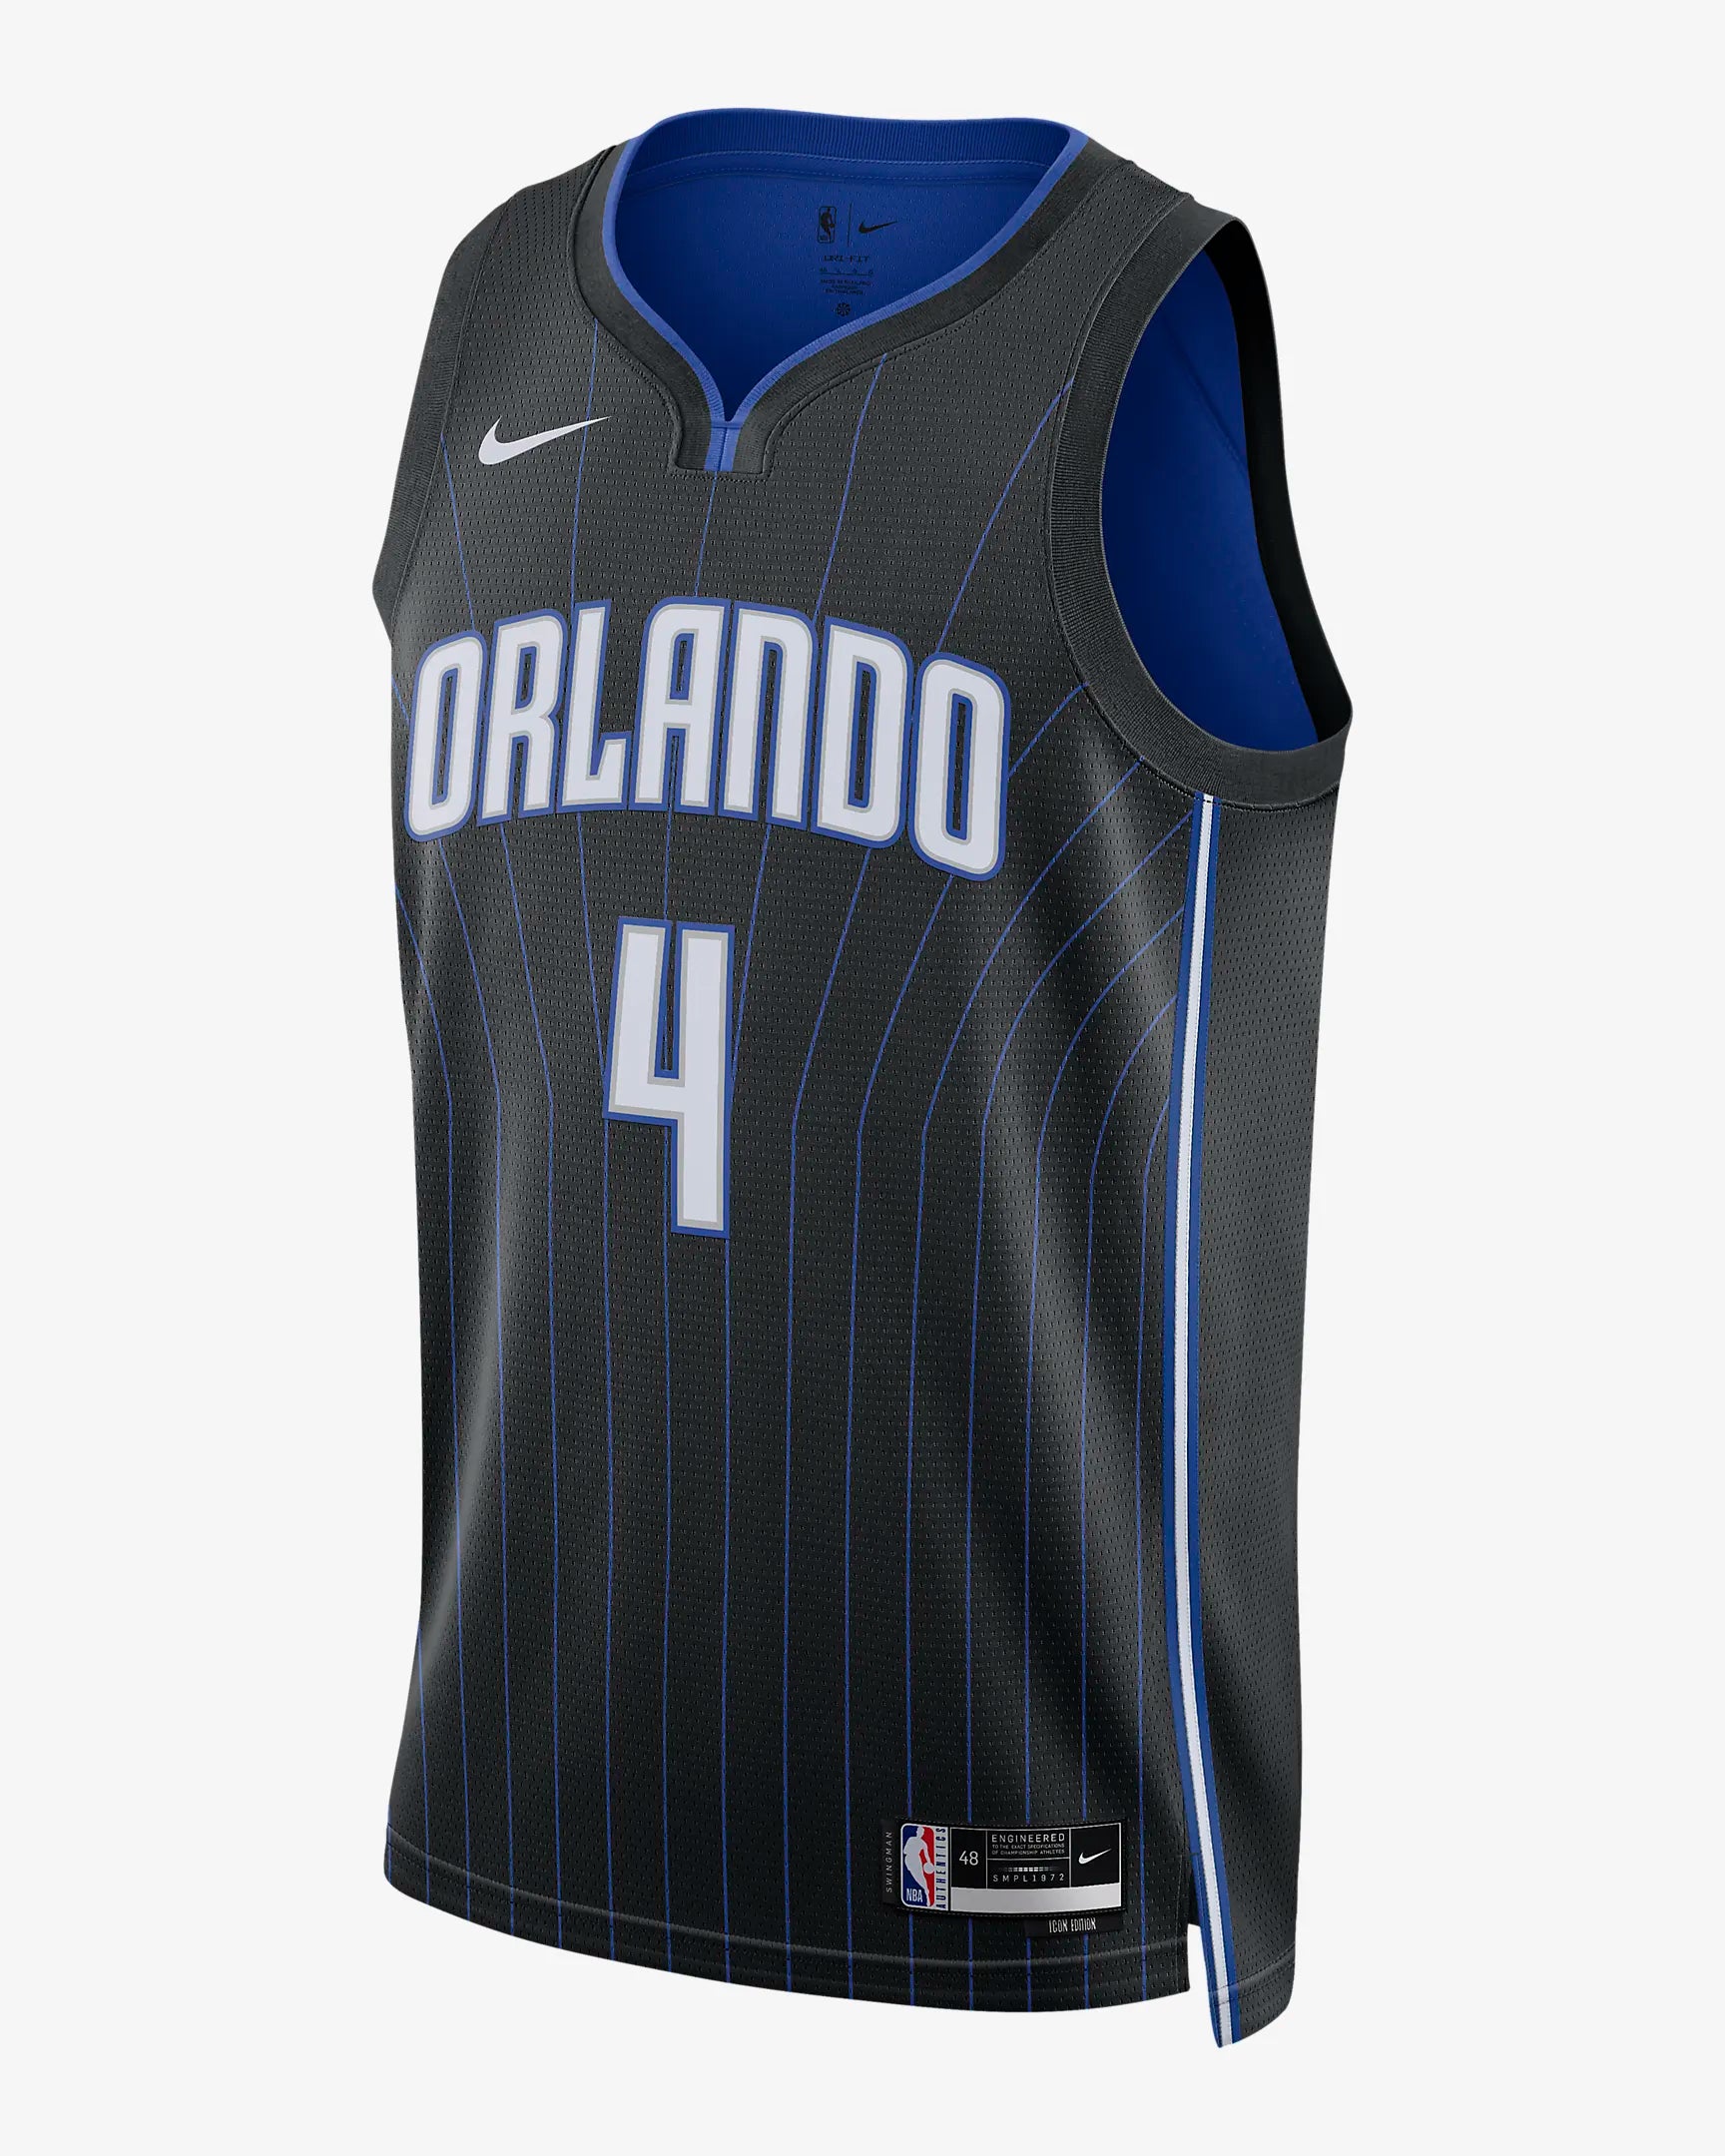 𝗢 𝗠 ☆ 𝗥 on X: For the 2022-23 season the Orlando Magic will wear their  Association (White) and Icon (Black) jerseys form pervious seasons. They  will sport a new Statement (Blue)